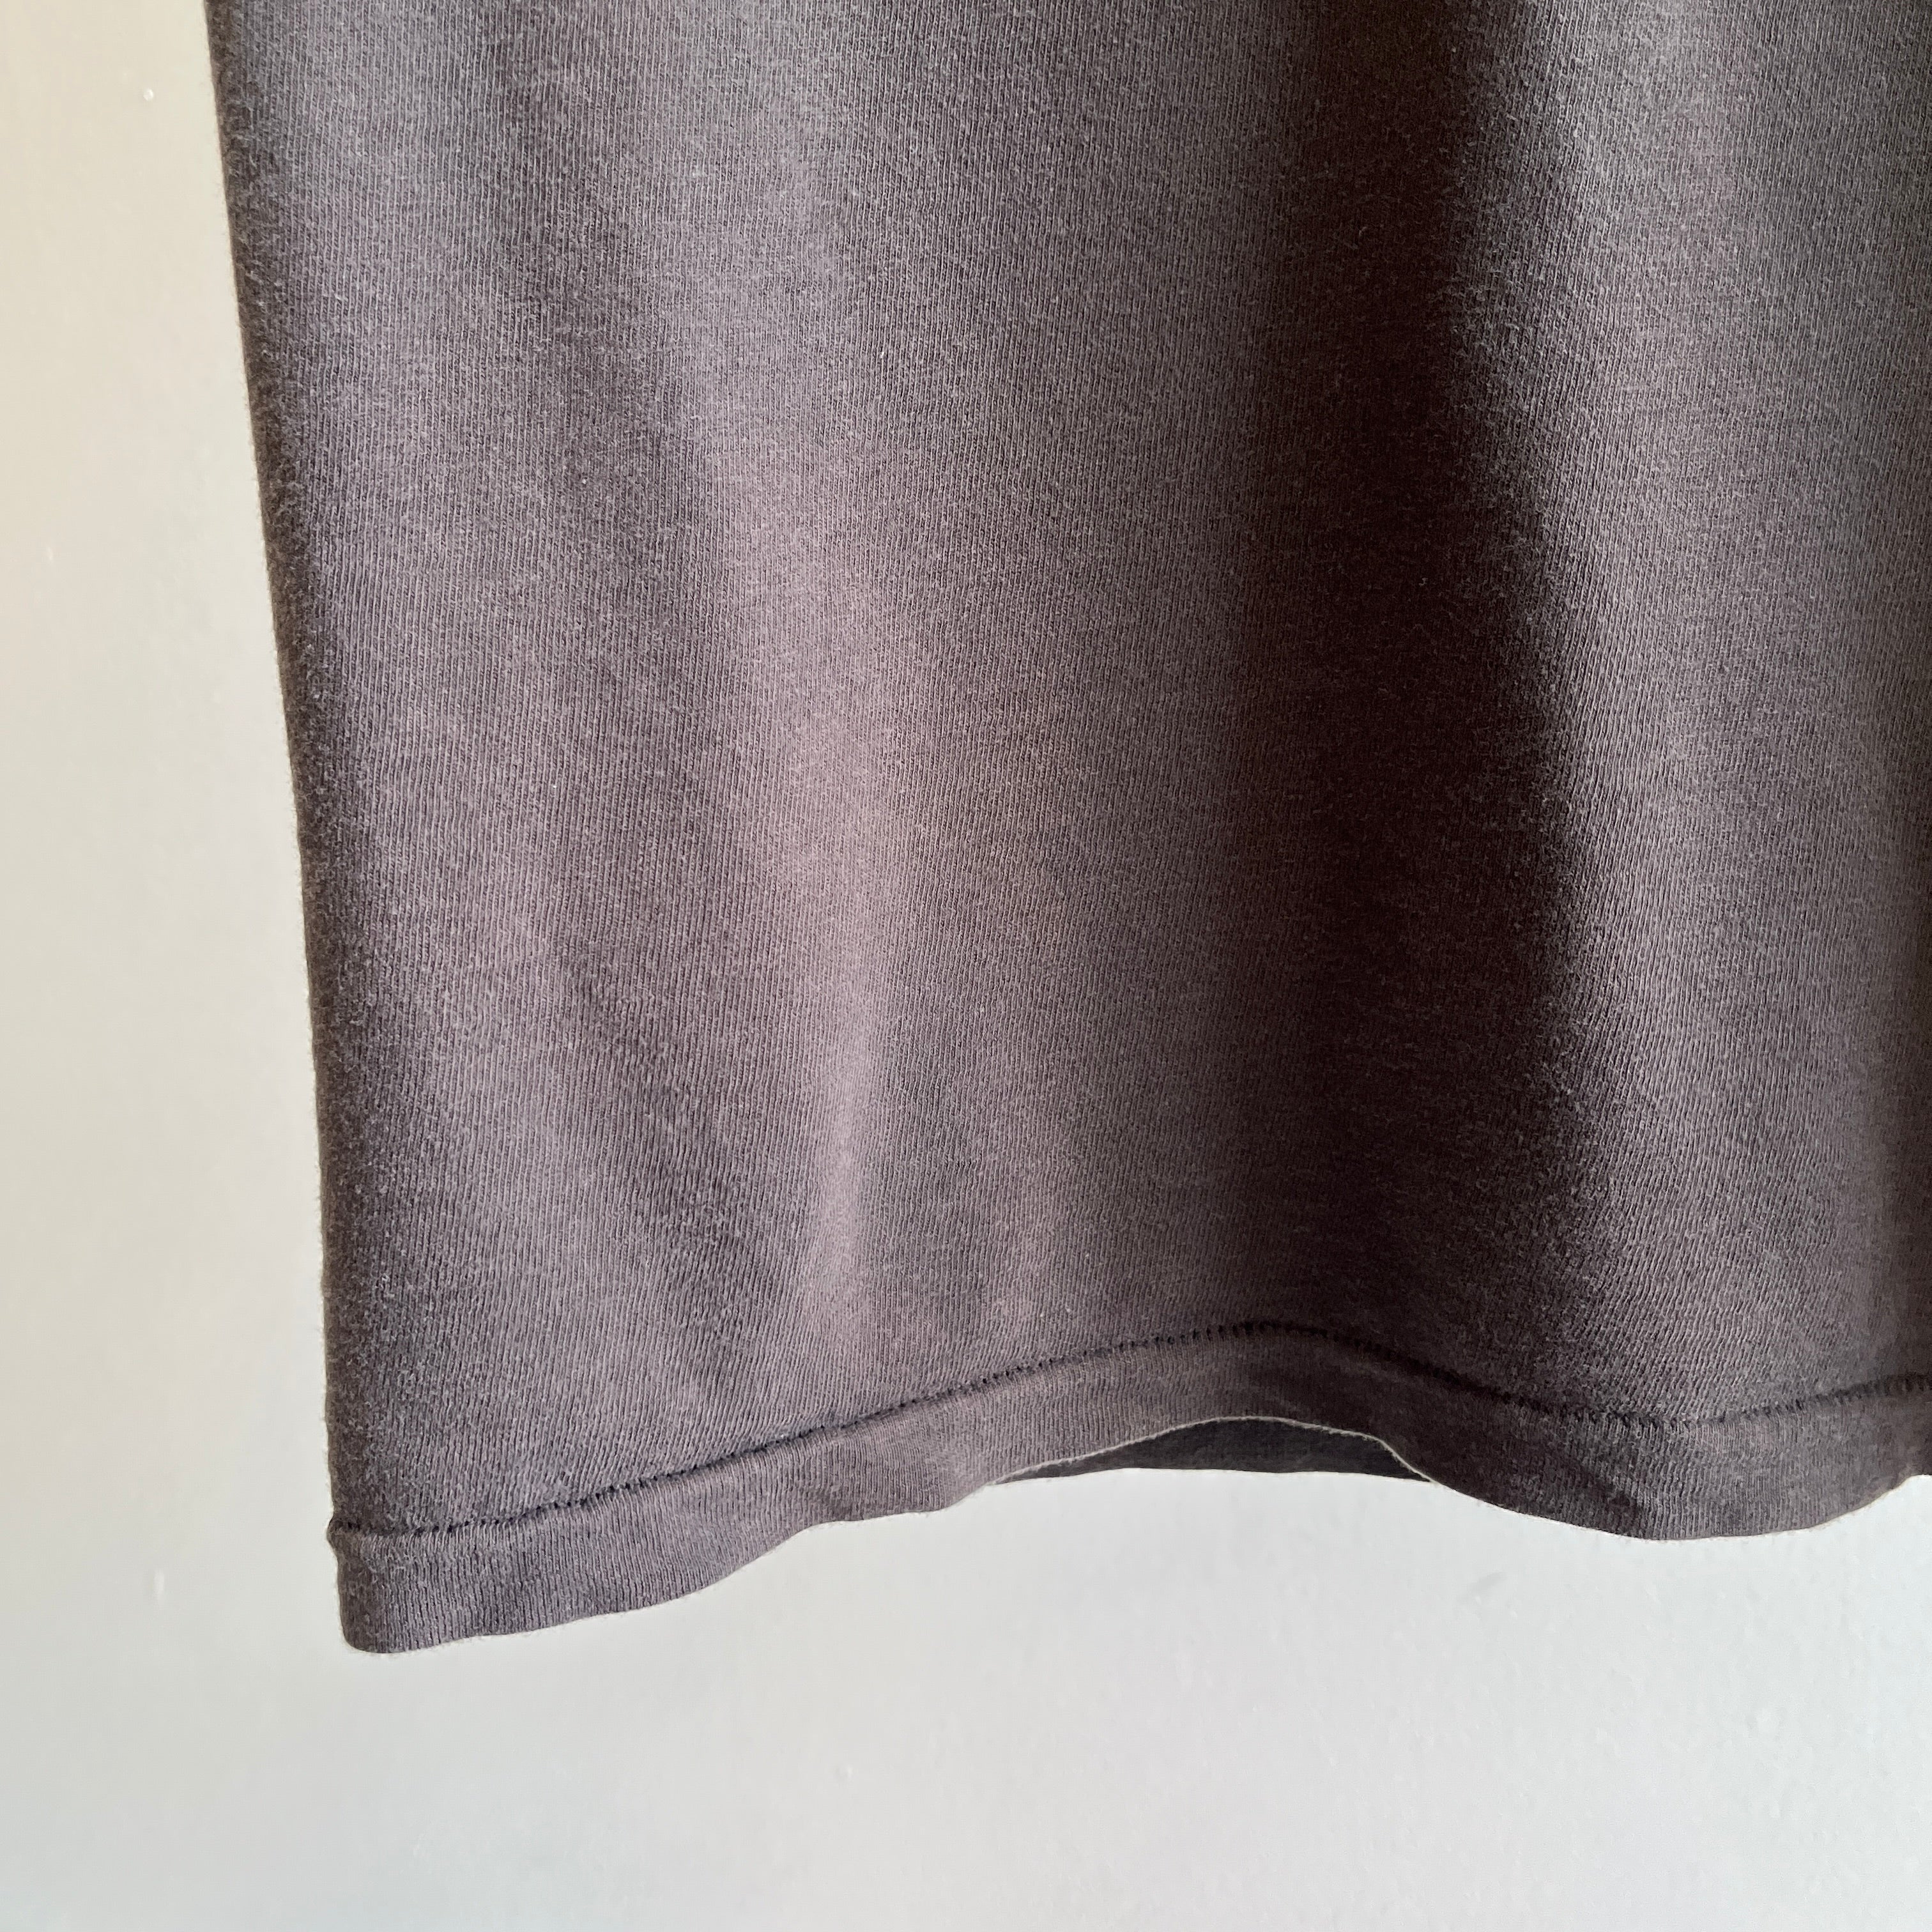 1990s Very Faded and Long Blank Black/Brown Pocket T-Shirt by Jockey